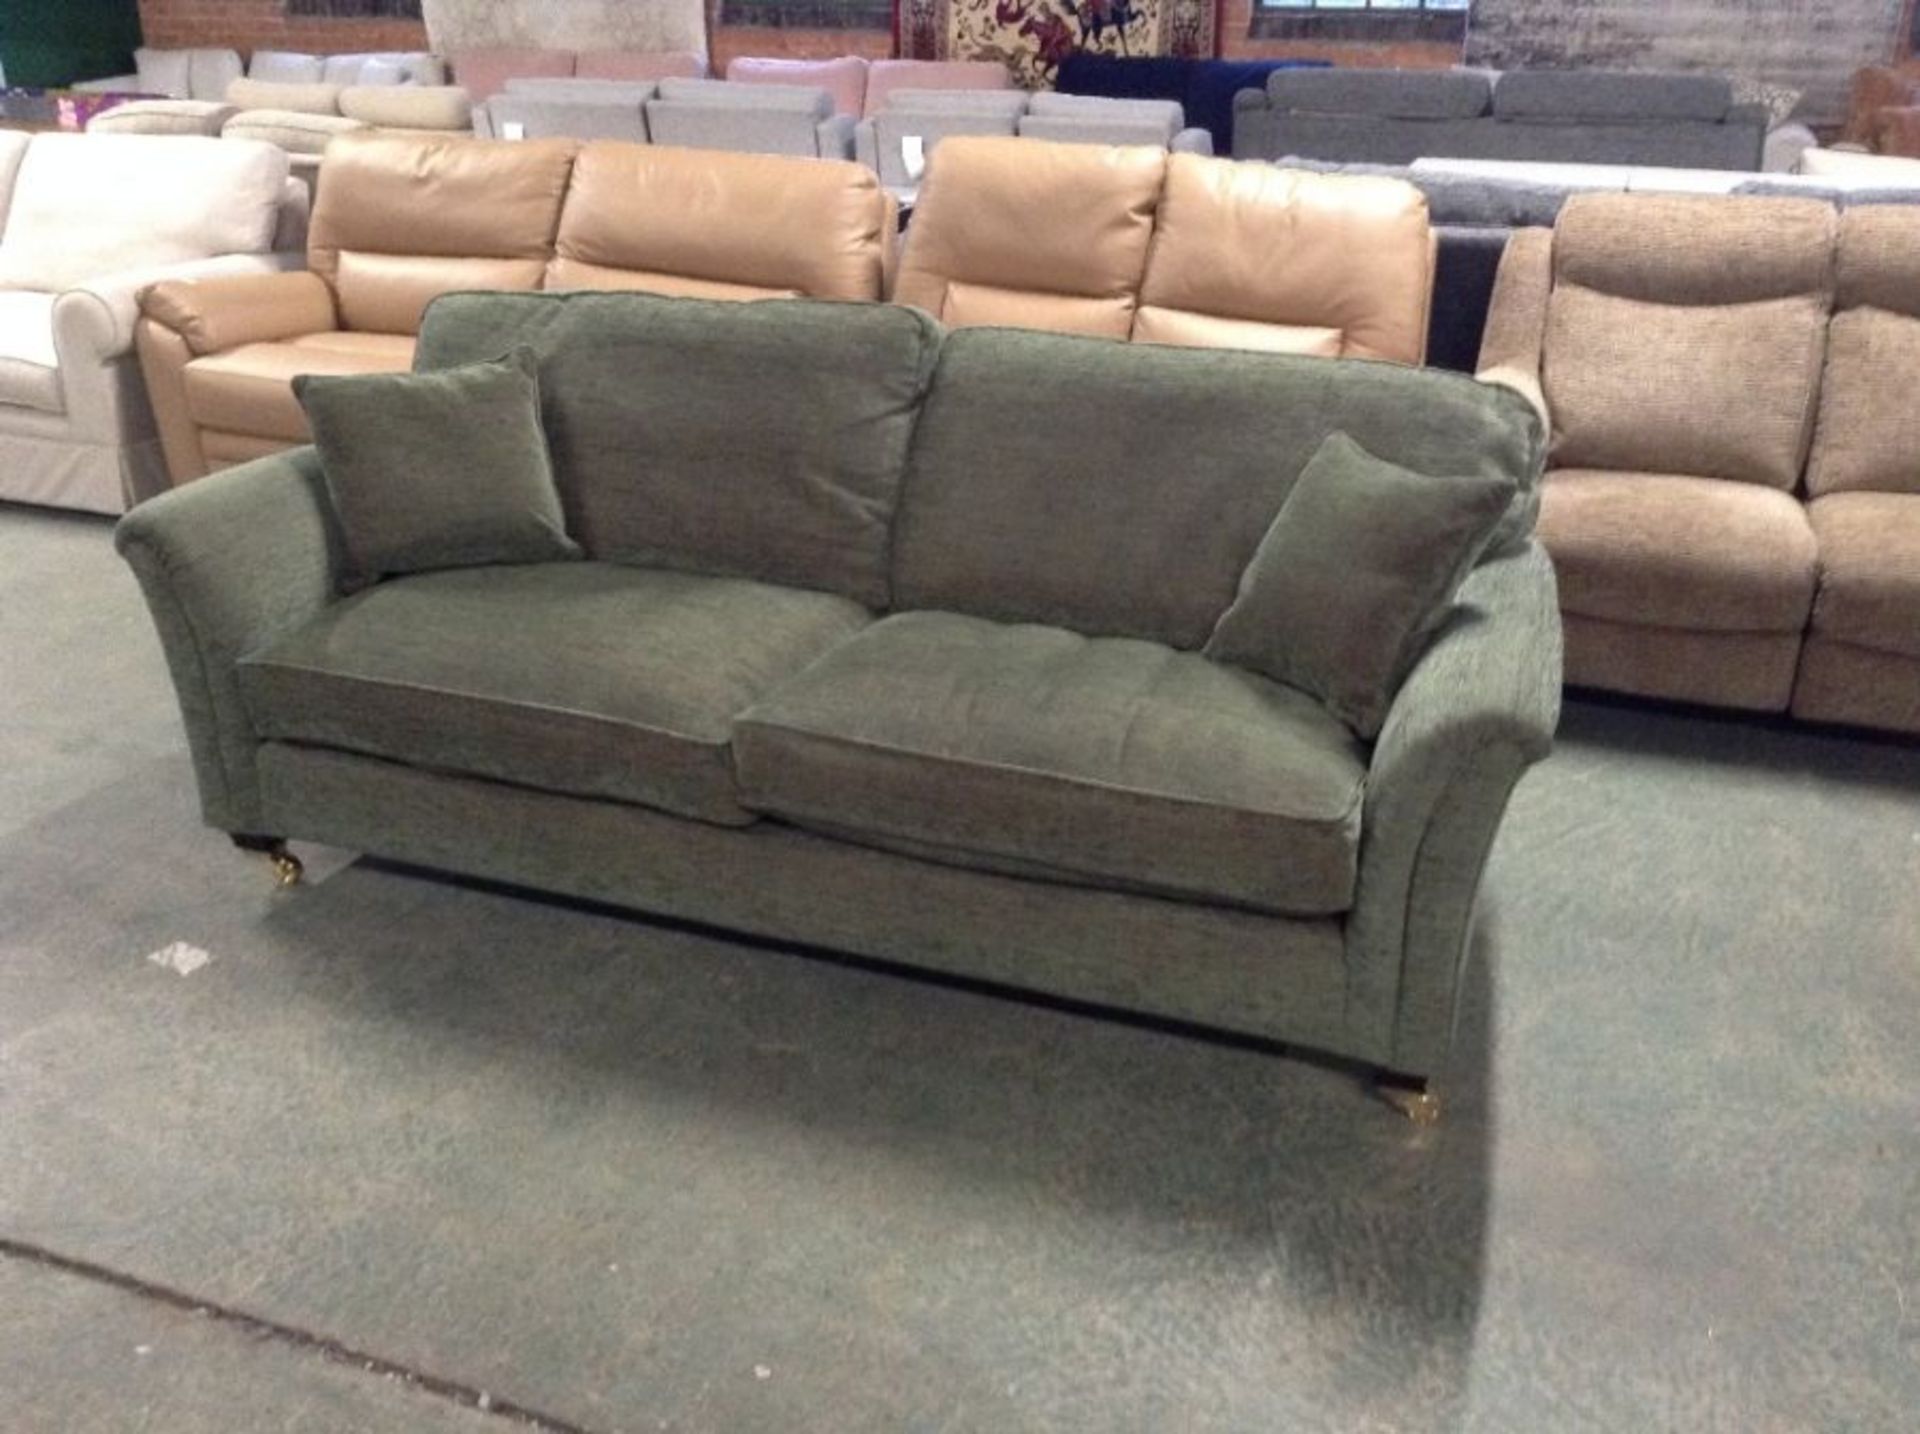 GREEN PATTERNED 3 SEATER SOFA (P1-WOO890601)